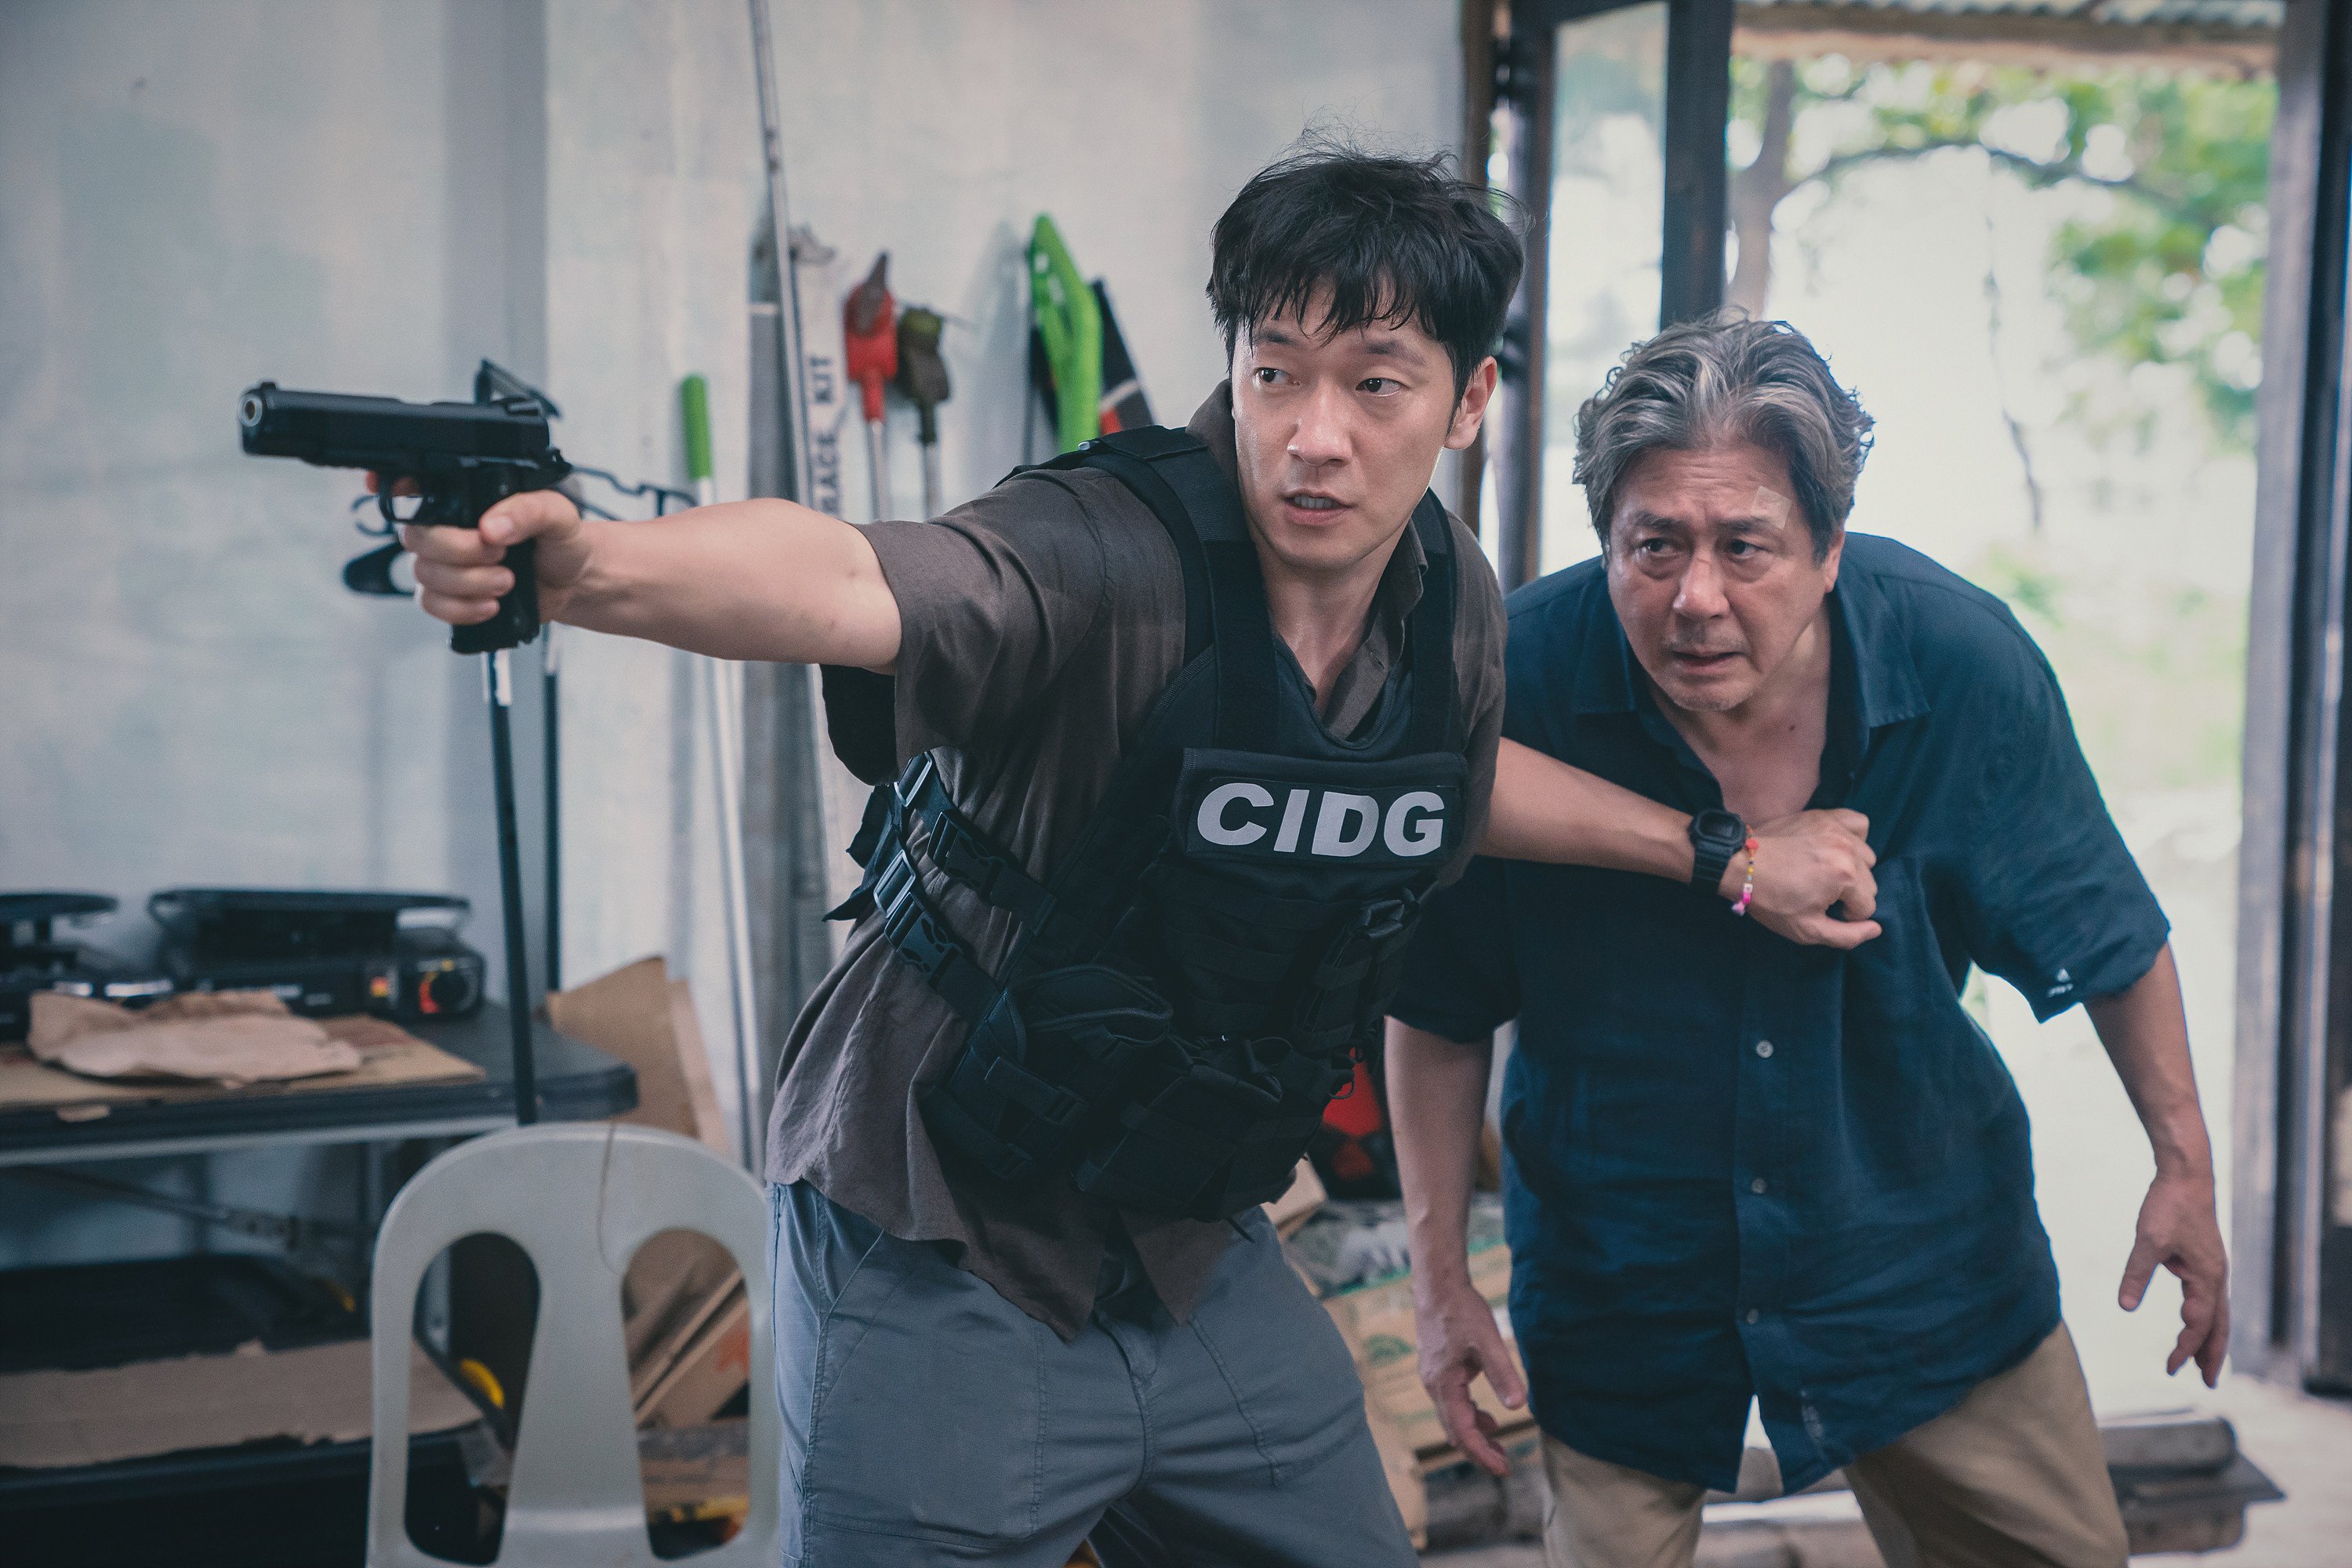 Son Suk-ku (left) and Choi Min-sik in a still from Big Bet season 2 on Disney+. “The streaming industry has opened new doors of opportunity for APAC content creators and storytellers,” says Walt Disney executive Mark Chan. Photo: Disney+.